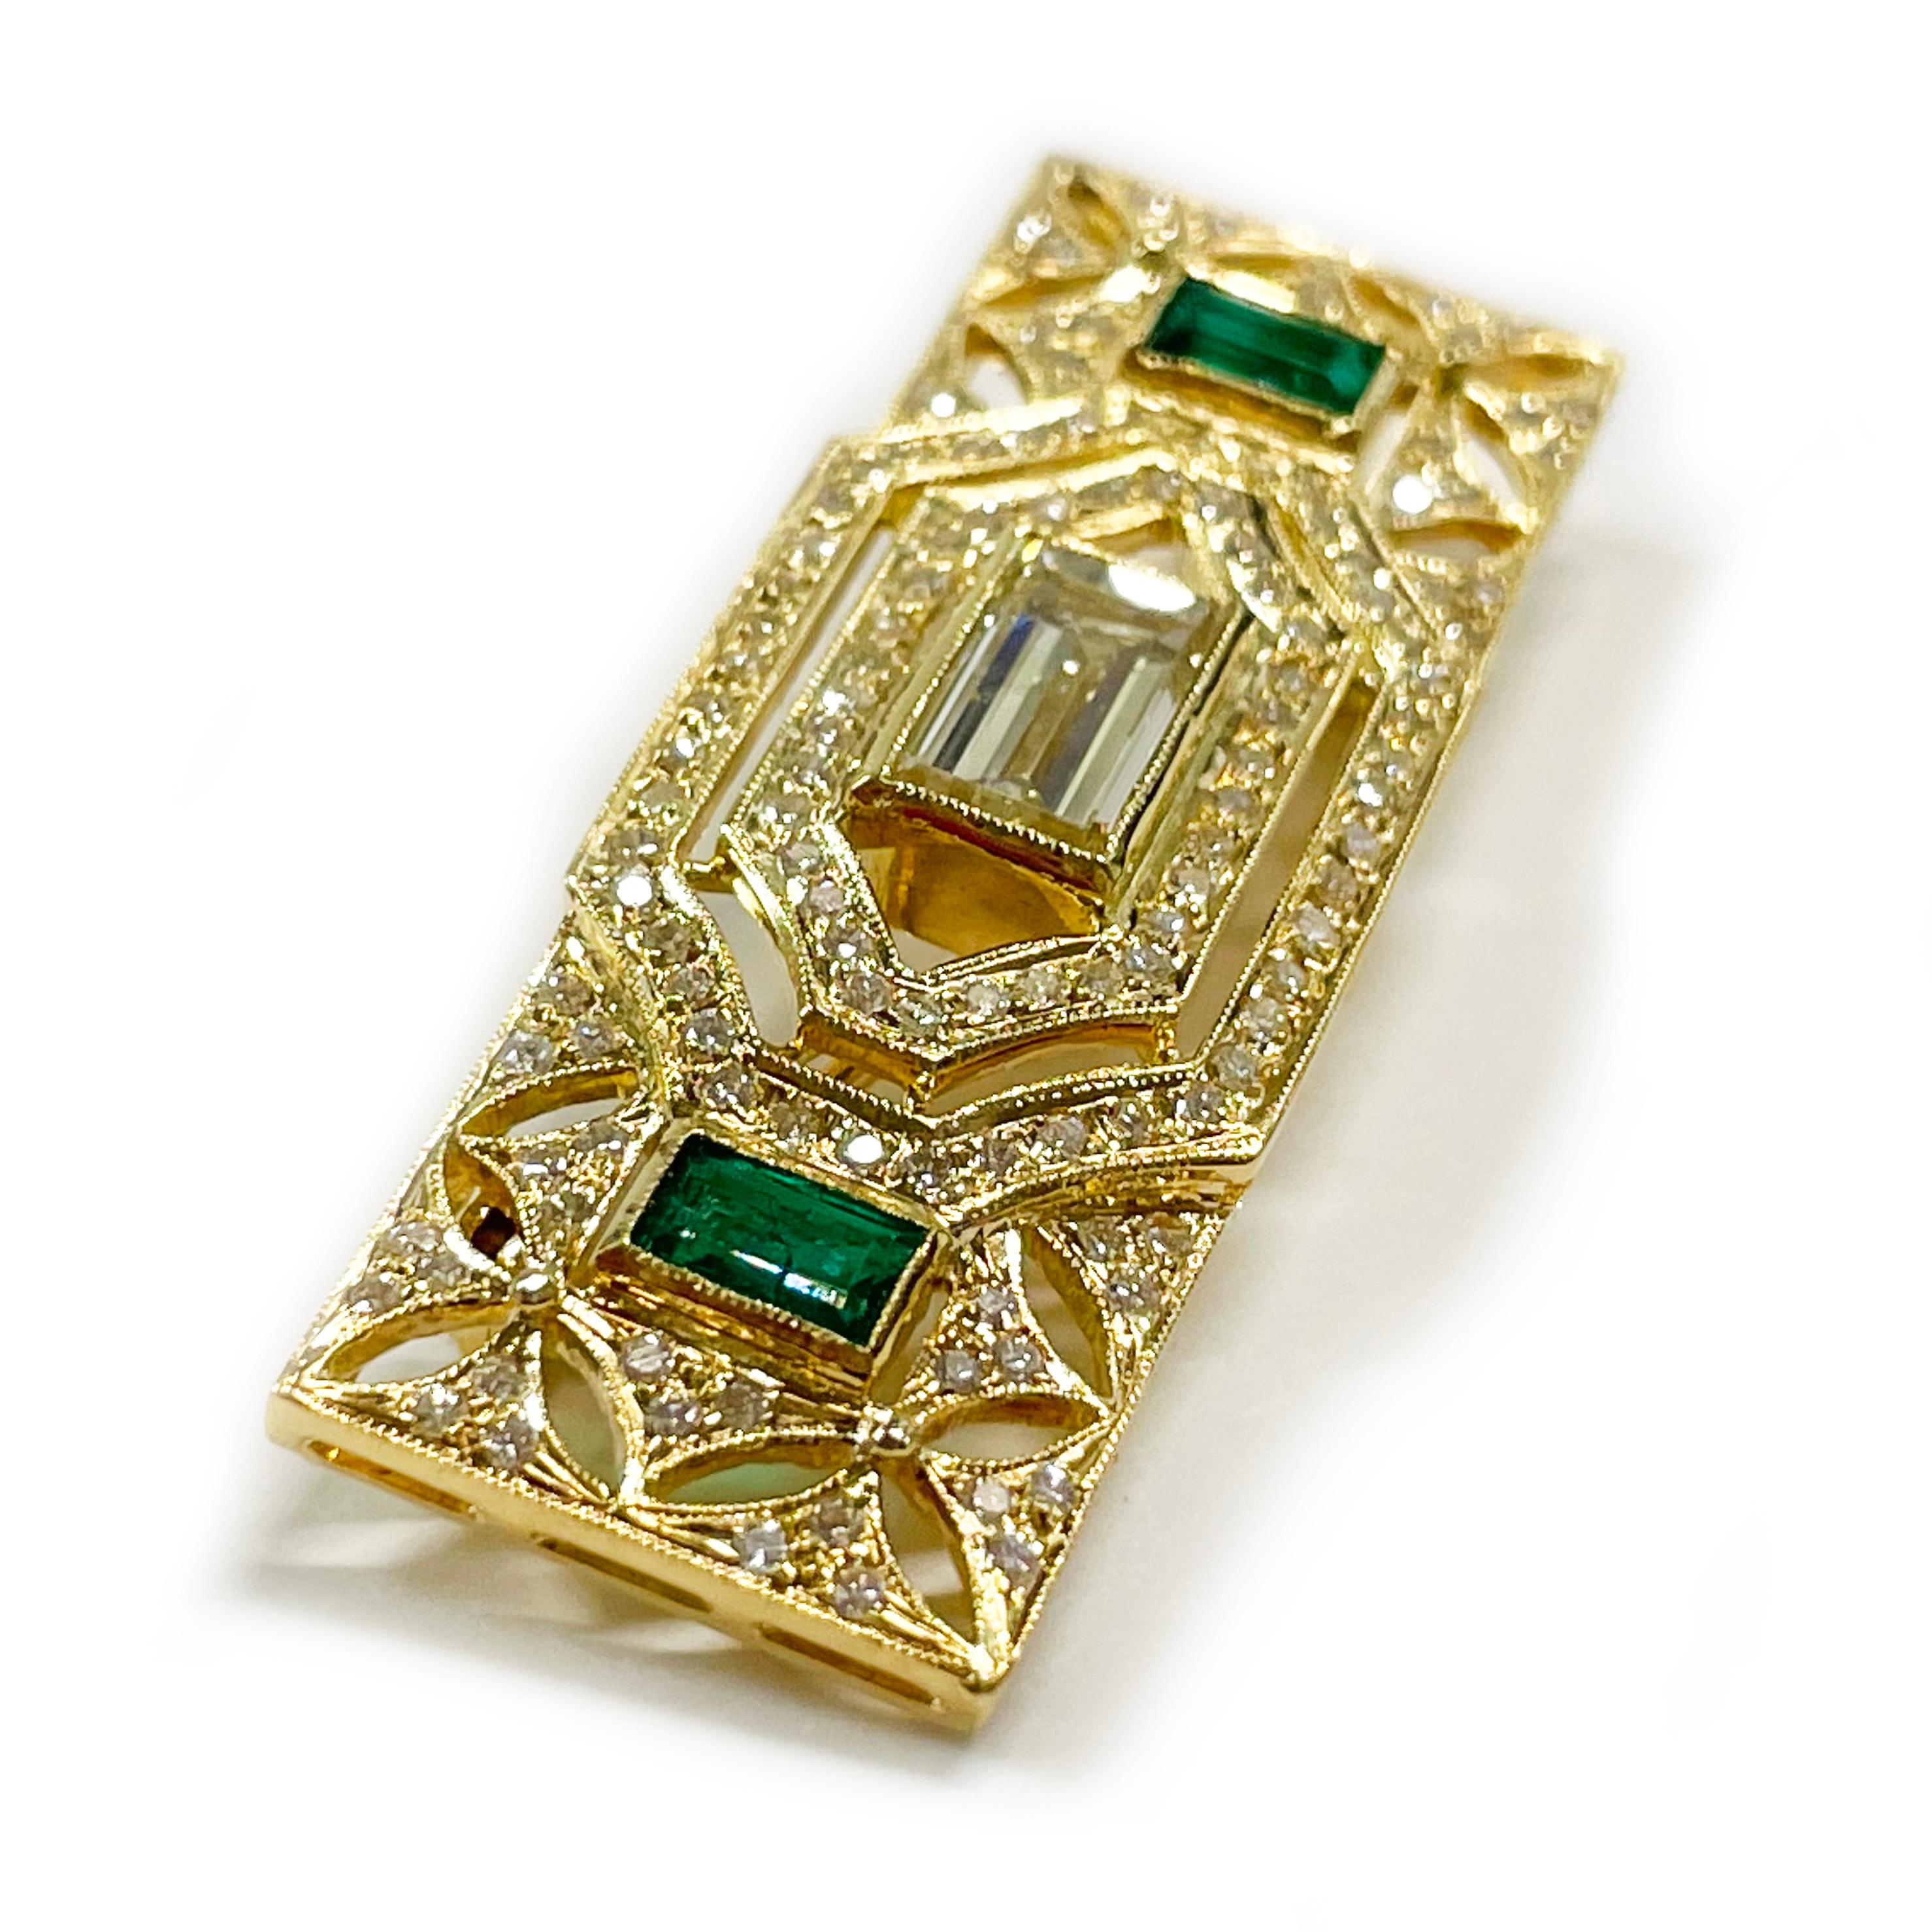 Art Deco 18 Karat Art Yellow Gold Emerald Diamond Brooch Pendant. This absolutely stunning piece features two emerald-cut green emeralds, a step-cut diamond and one hundred thirty round diamonds set in yellow gold with lovely milgrain detail. The